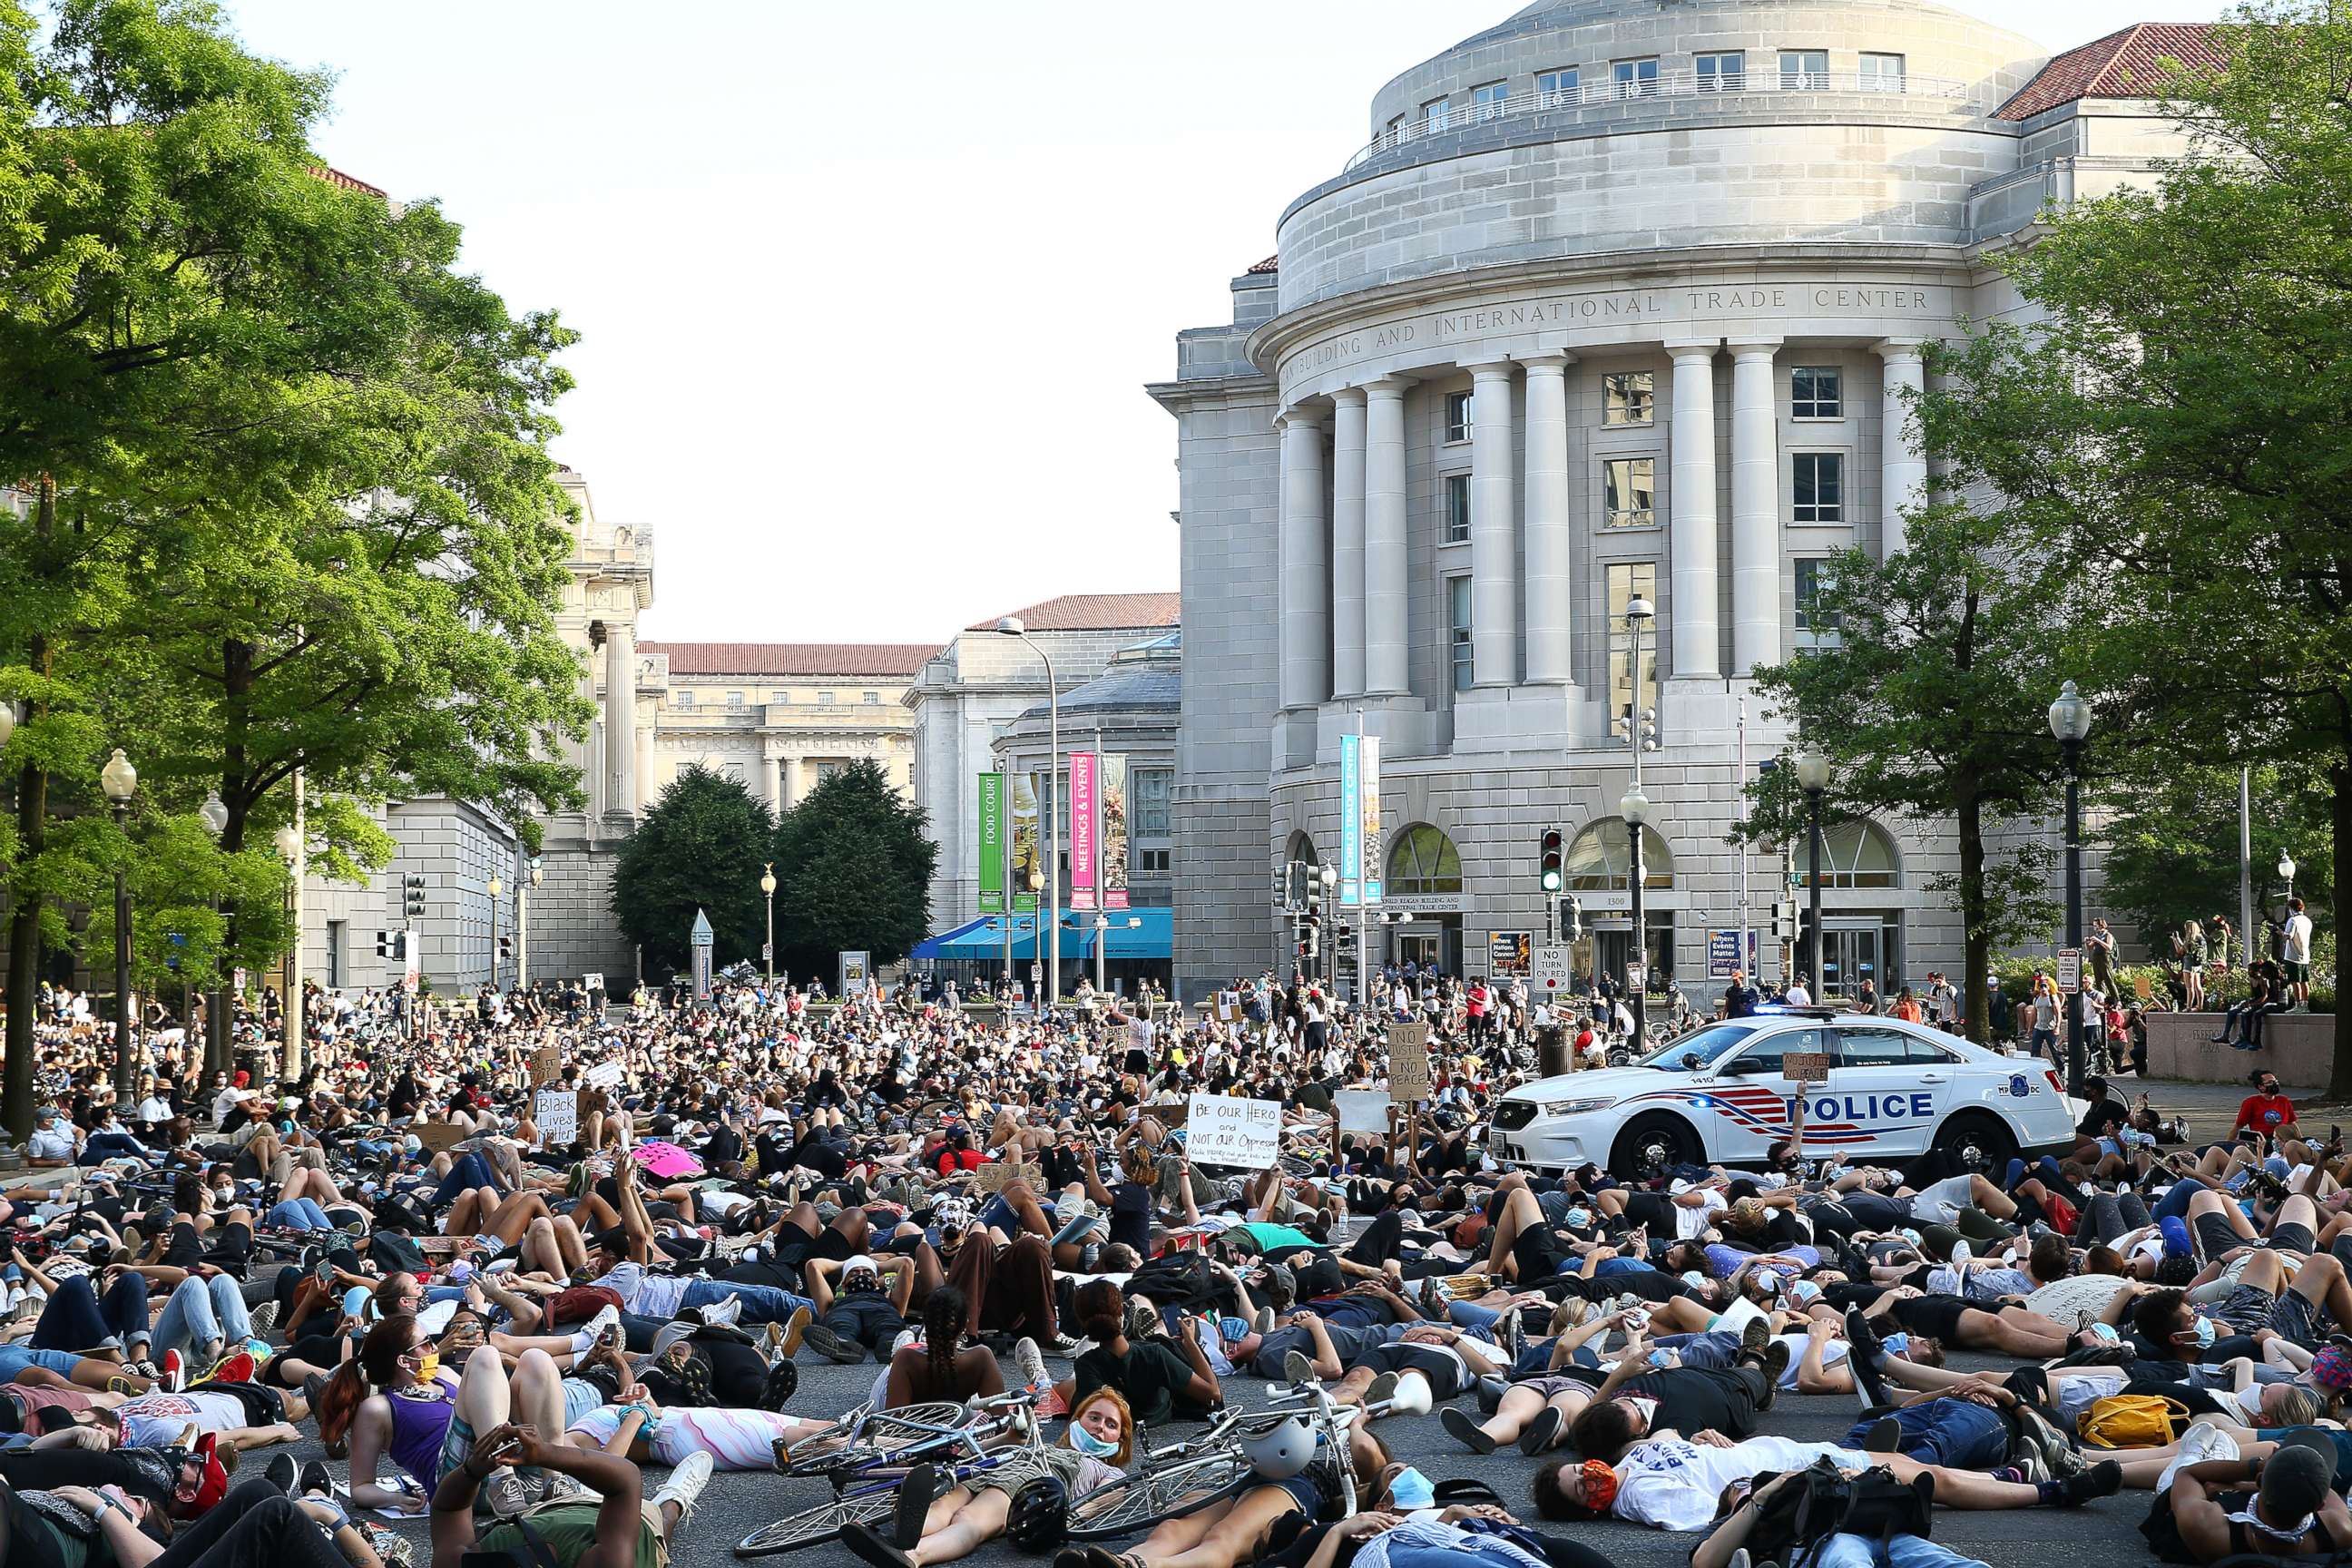 PHOTO: Demonstrators lay down at 15th St. and Pennsylvania Avenue during a peaceful protest against police brutality and the death of George Floyd, on June 3, 2020 in Washington, DC.